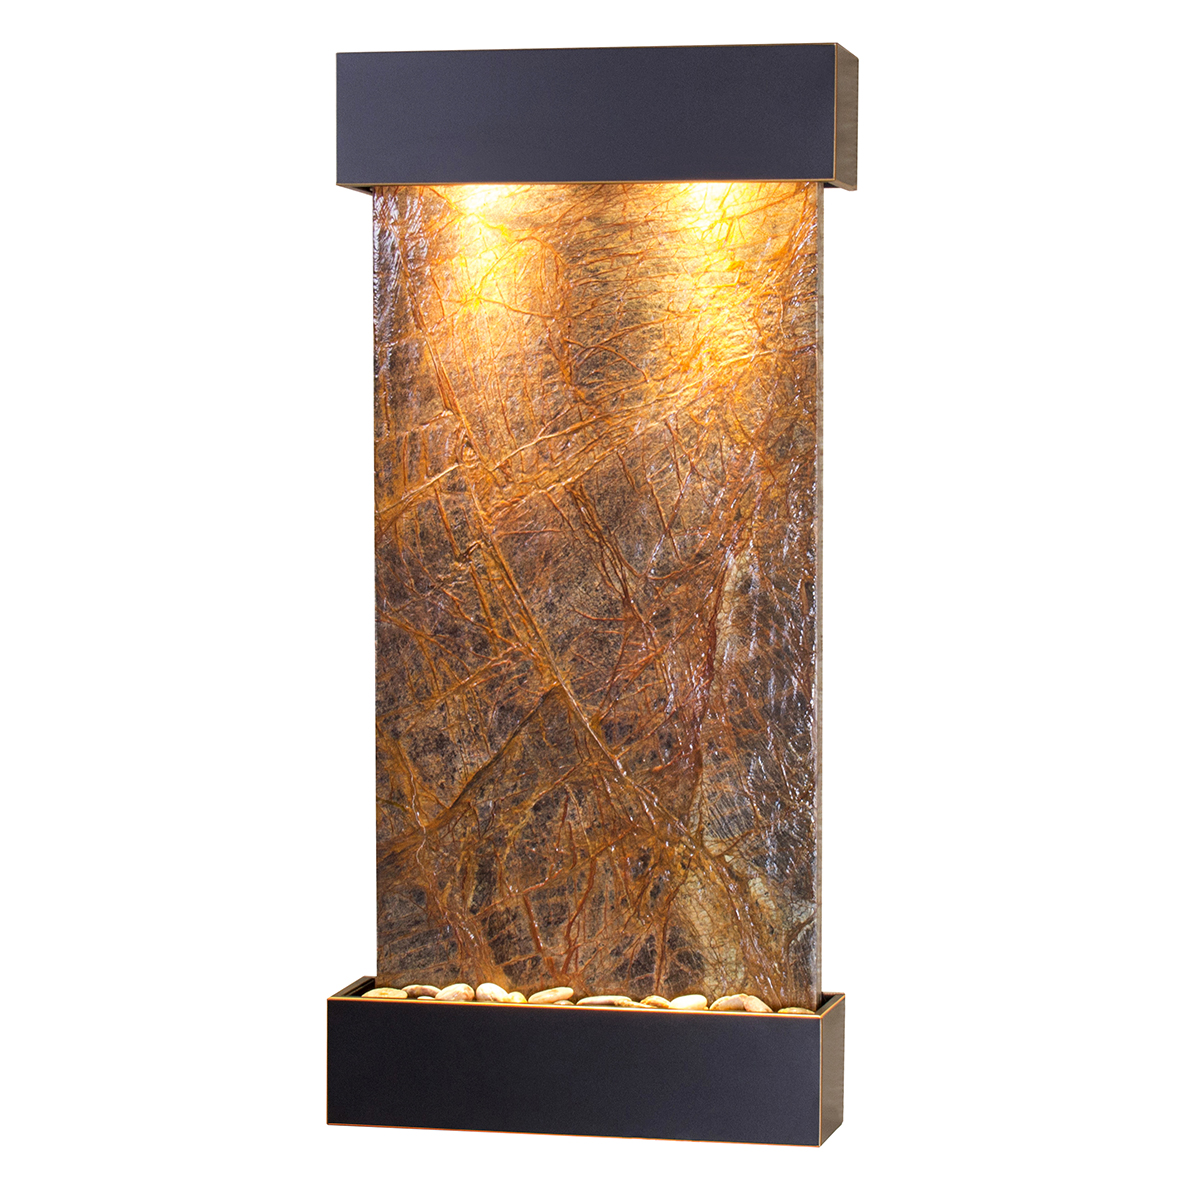 Adagio WCS1506 Whispering Creek Blackened Copper Brown Marble Wall Fountain - image 2 of 2